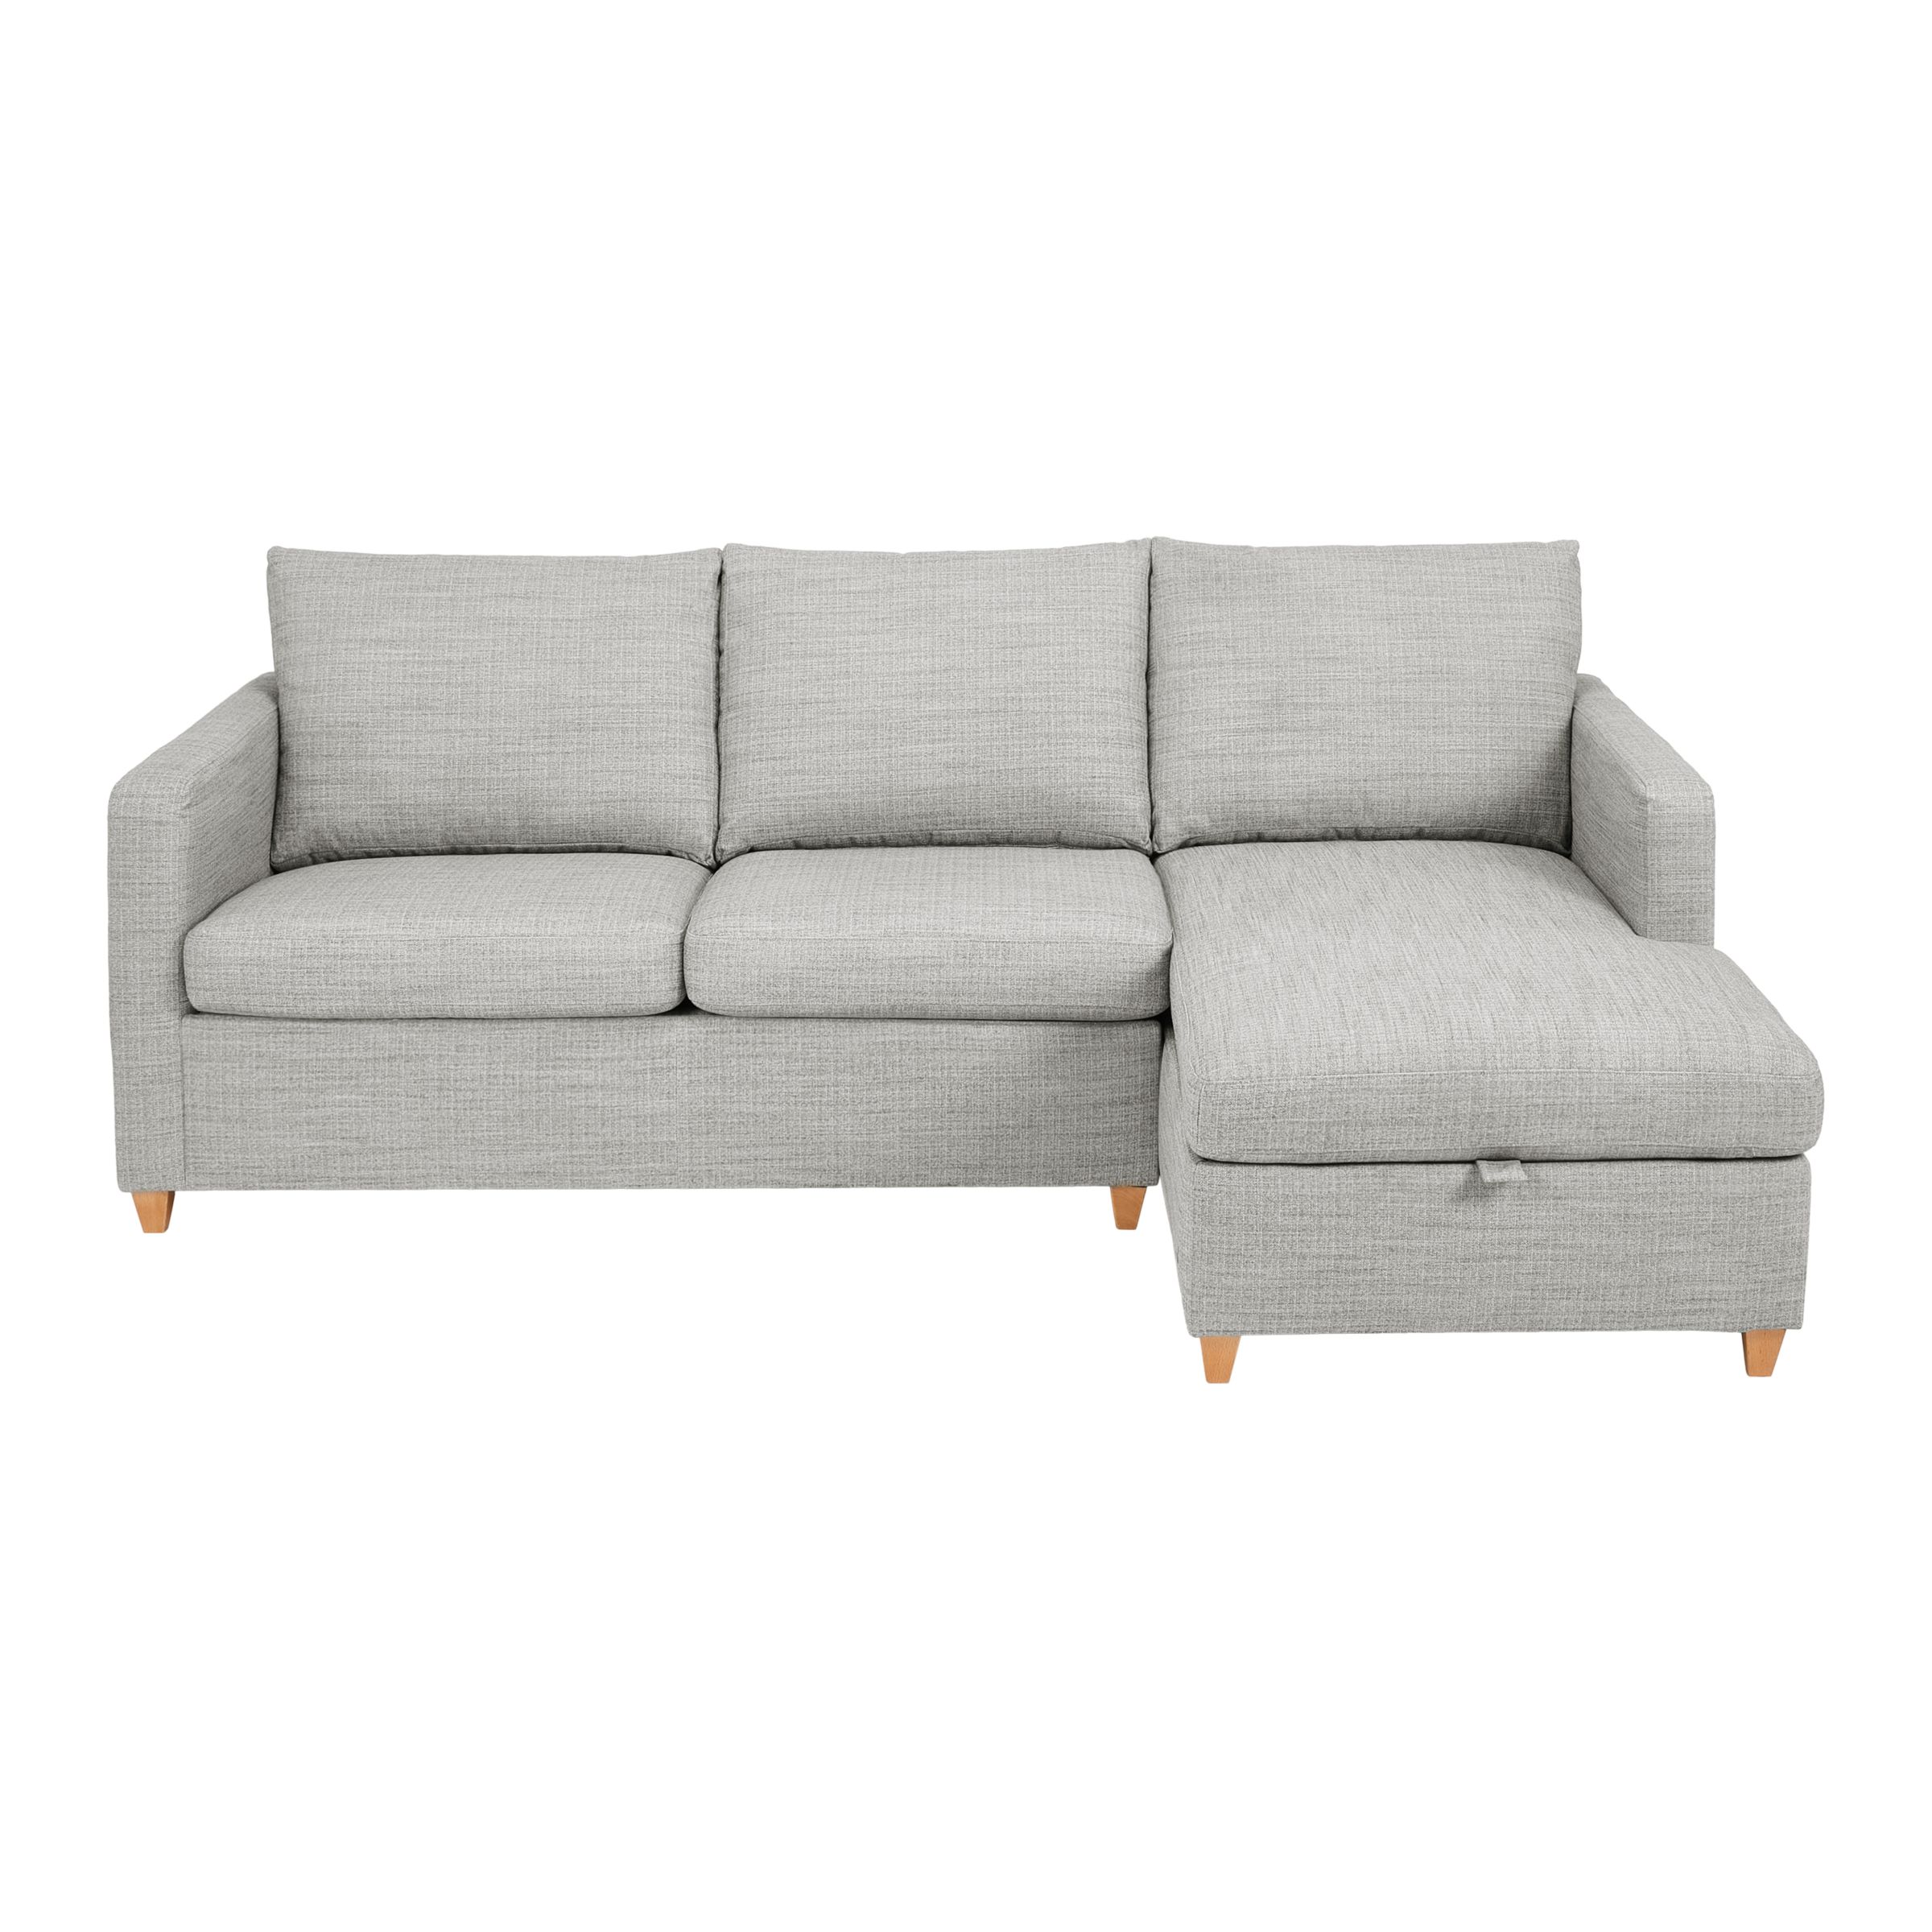 Photo of John lewis bailey 5+ seater rhf chaise end sofa bed